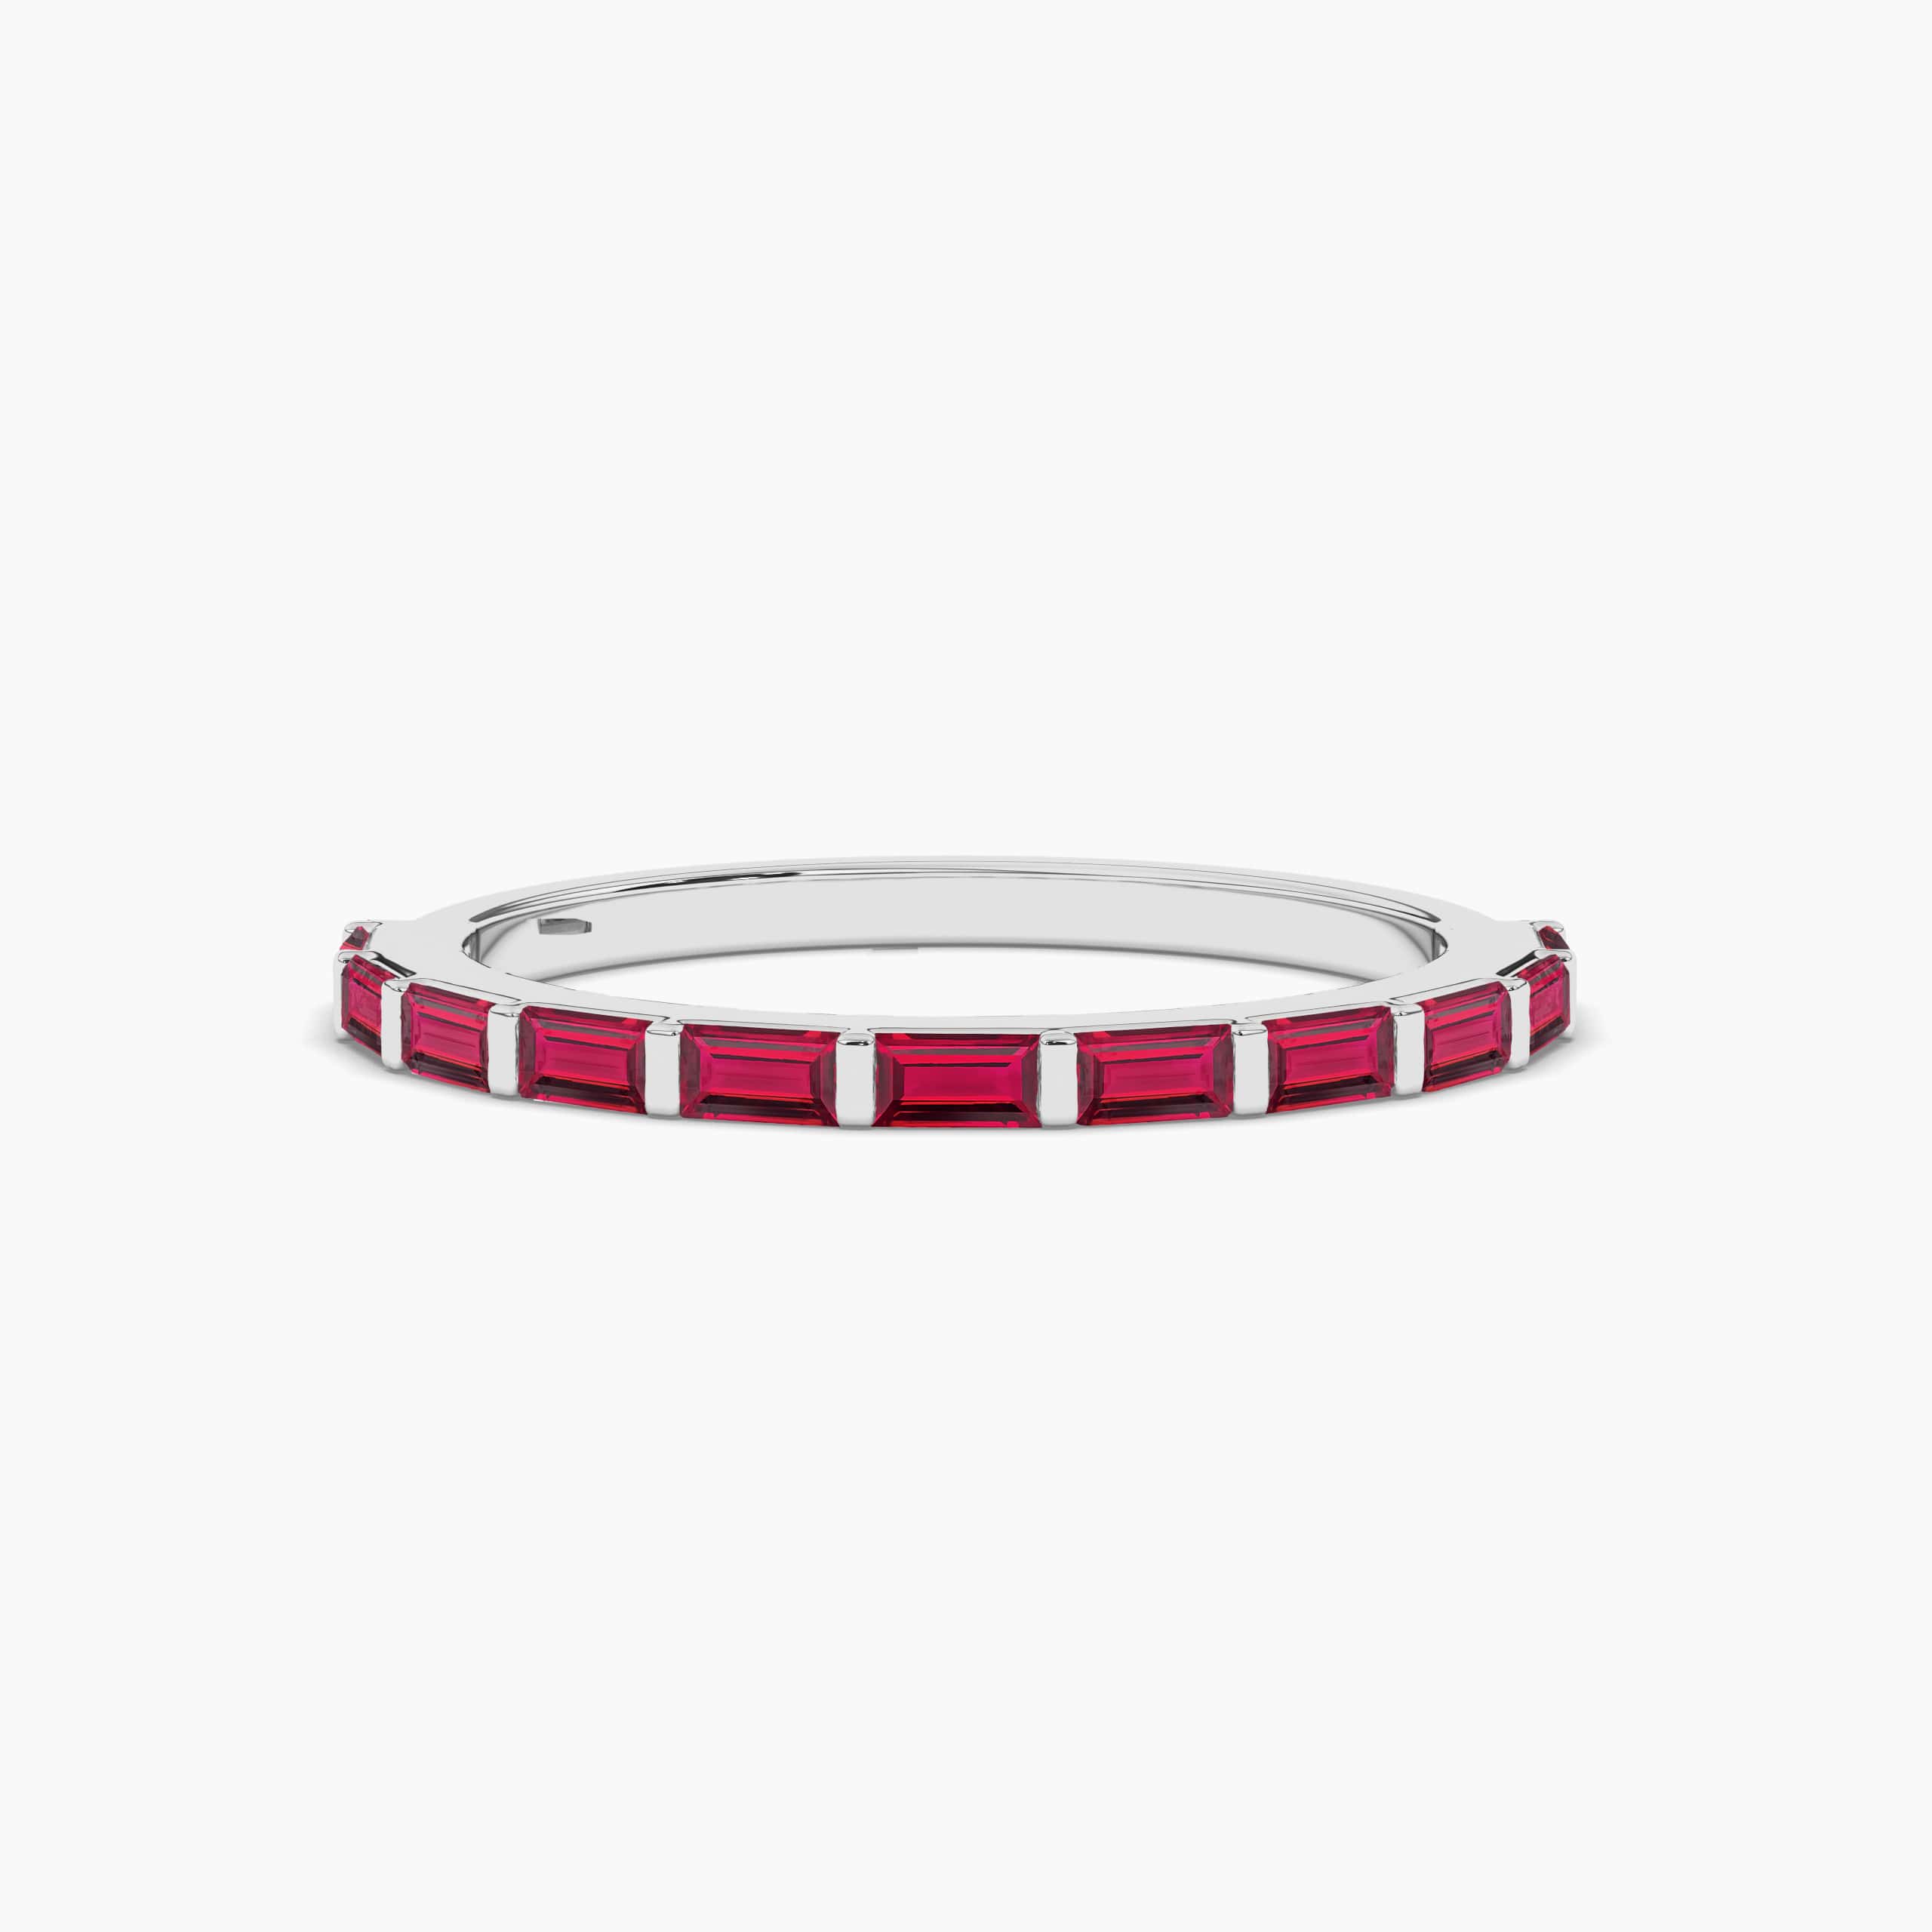 Baguette Cut Red Ruby Diamond Wedding Ring In White Gold